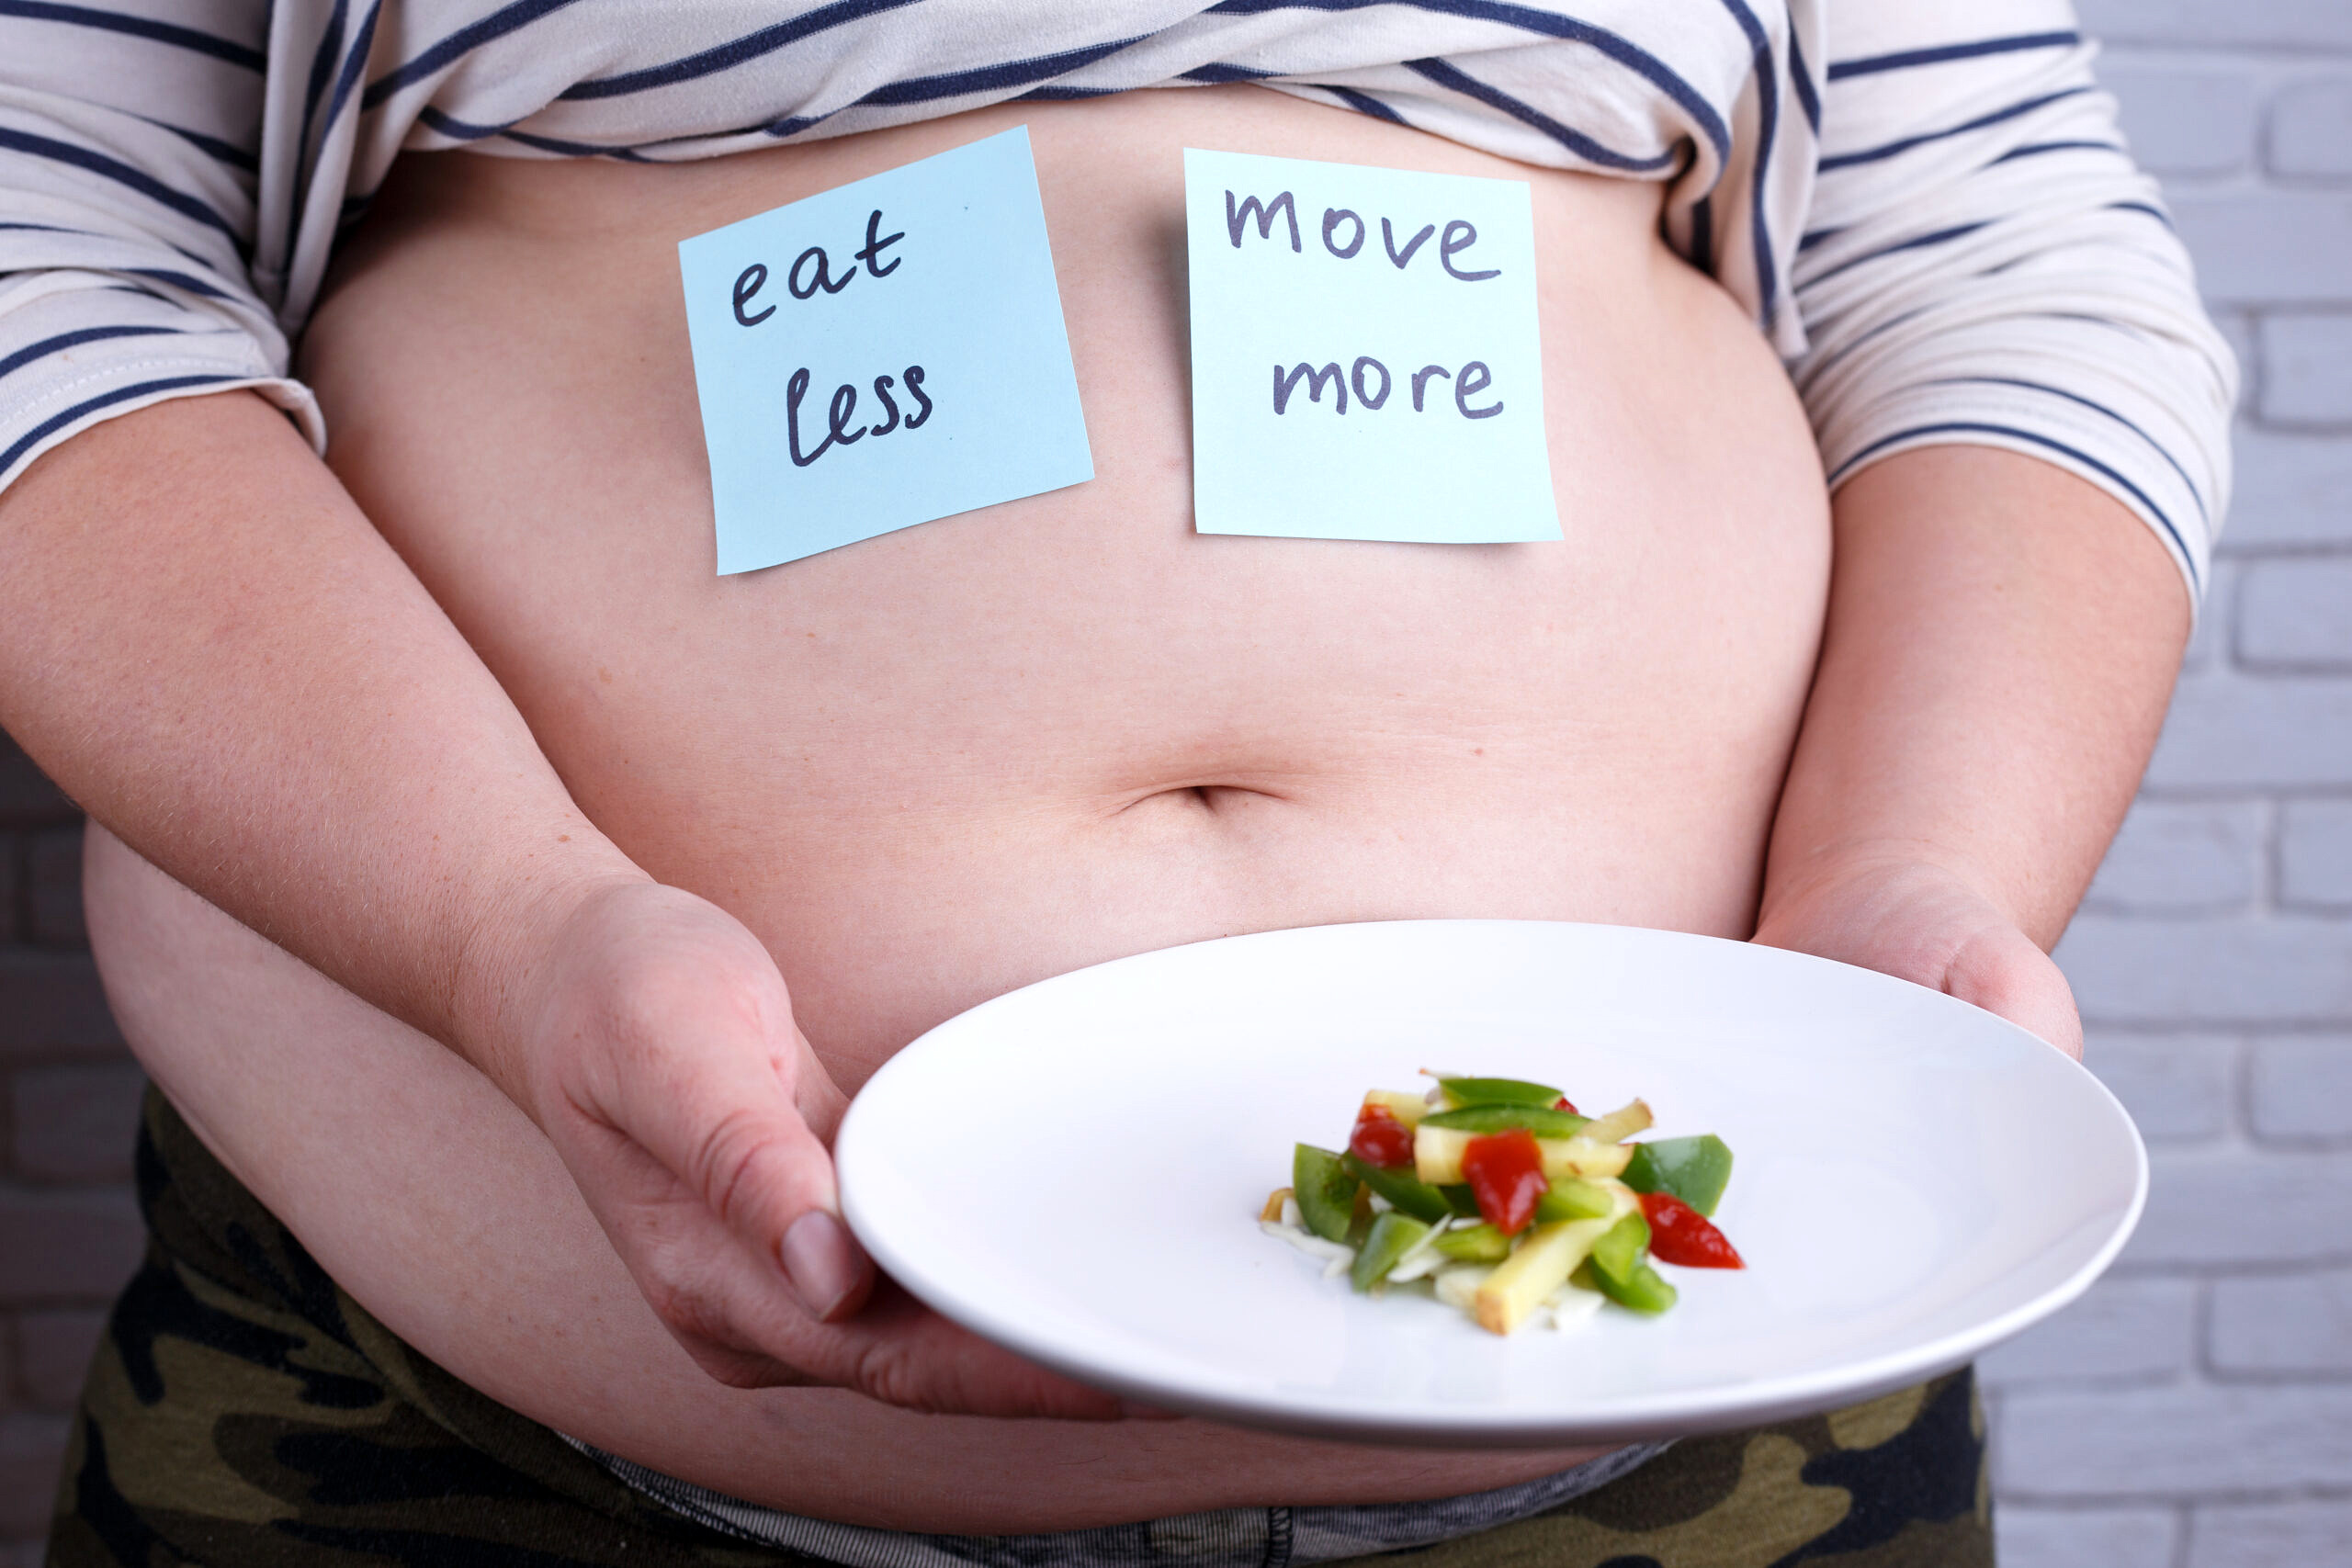 eat less move more, weight loss, calorie restriction, calories in vs calories out